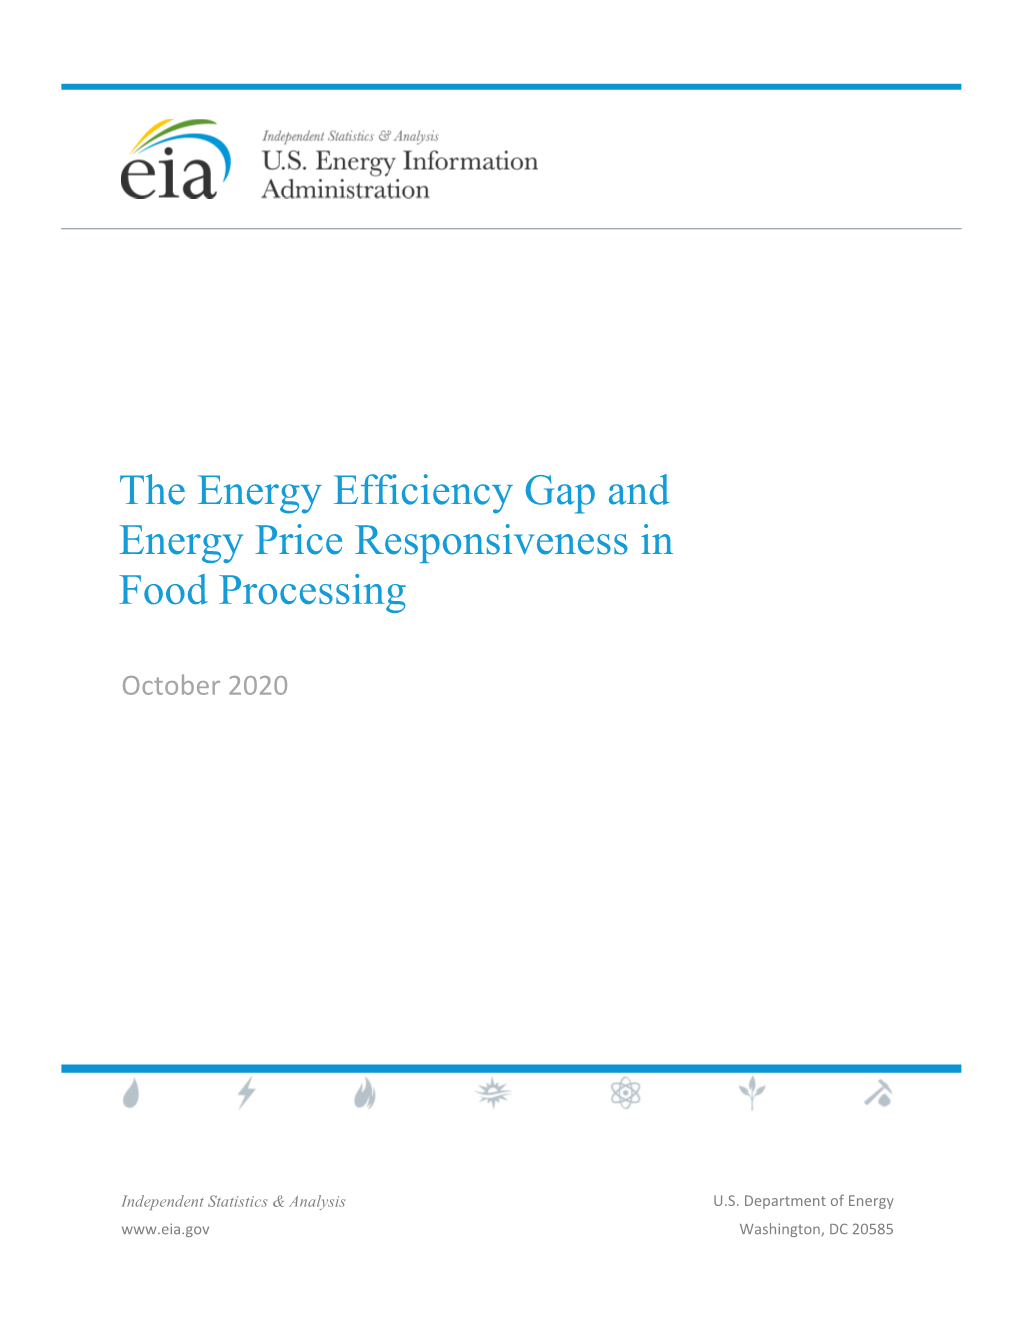 The Energy Efficiency Gap and Energy Price Responsiveness in Food Processing